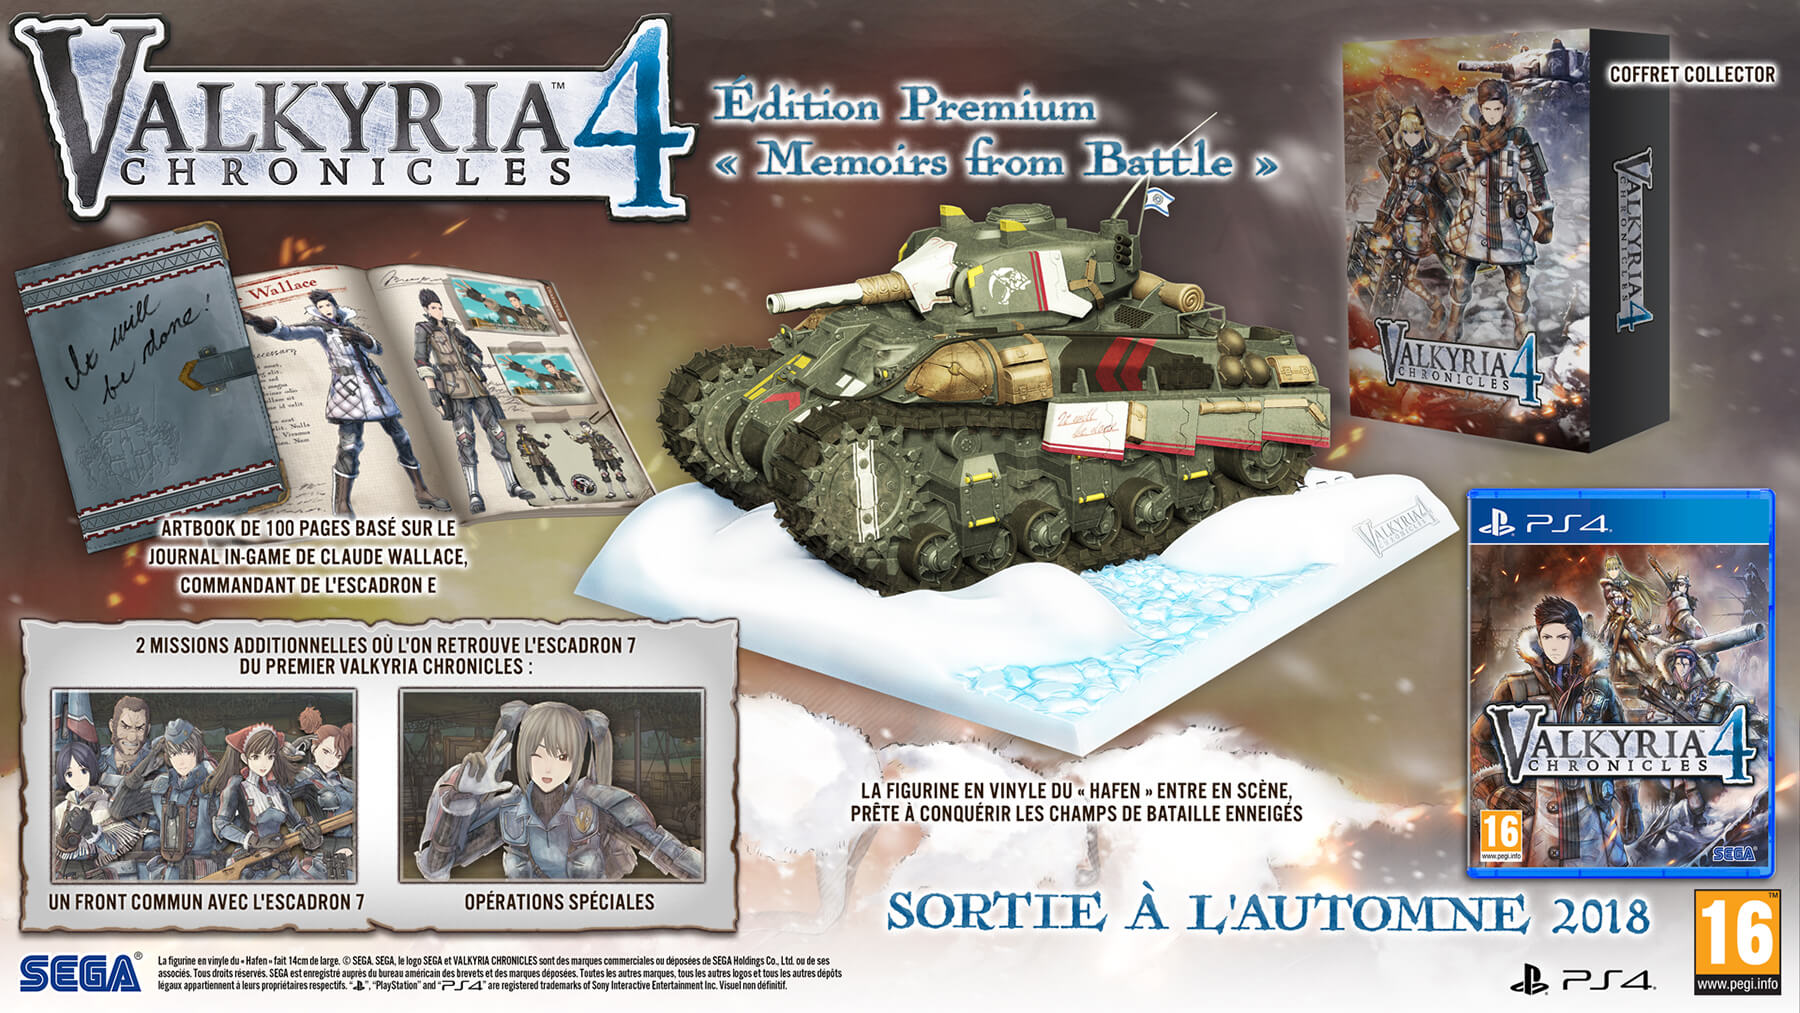 Valkyria Chronicles 4 collector